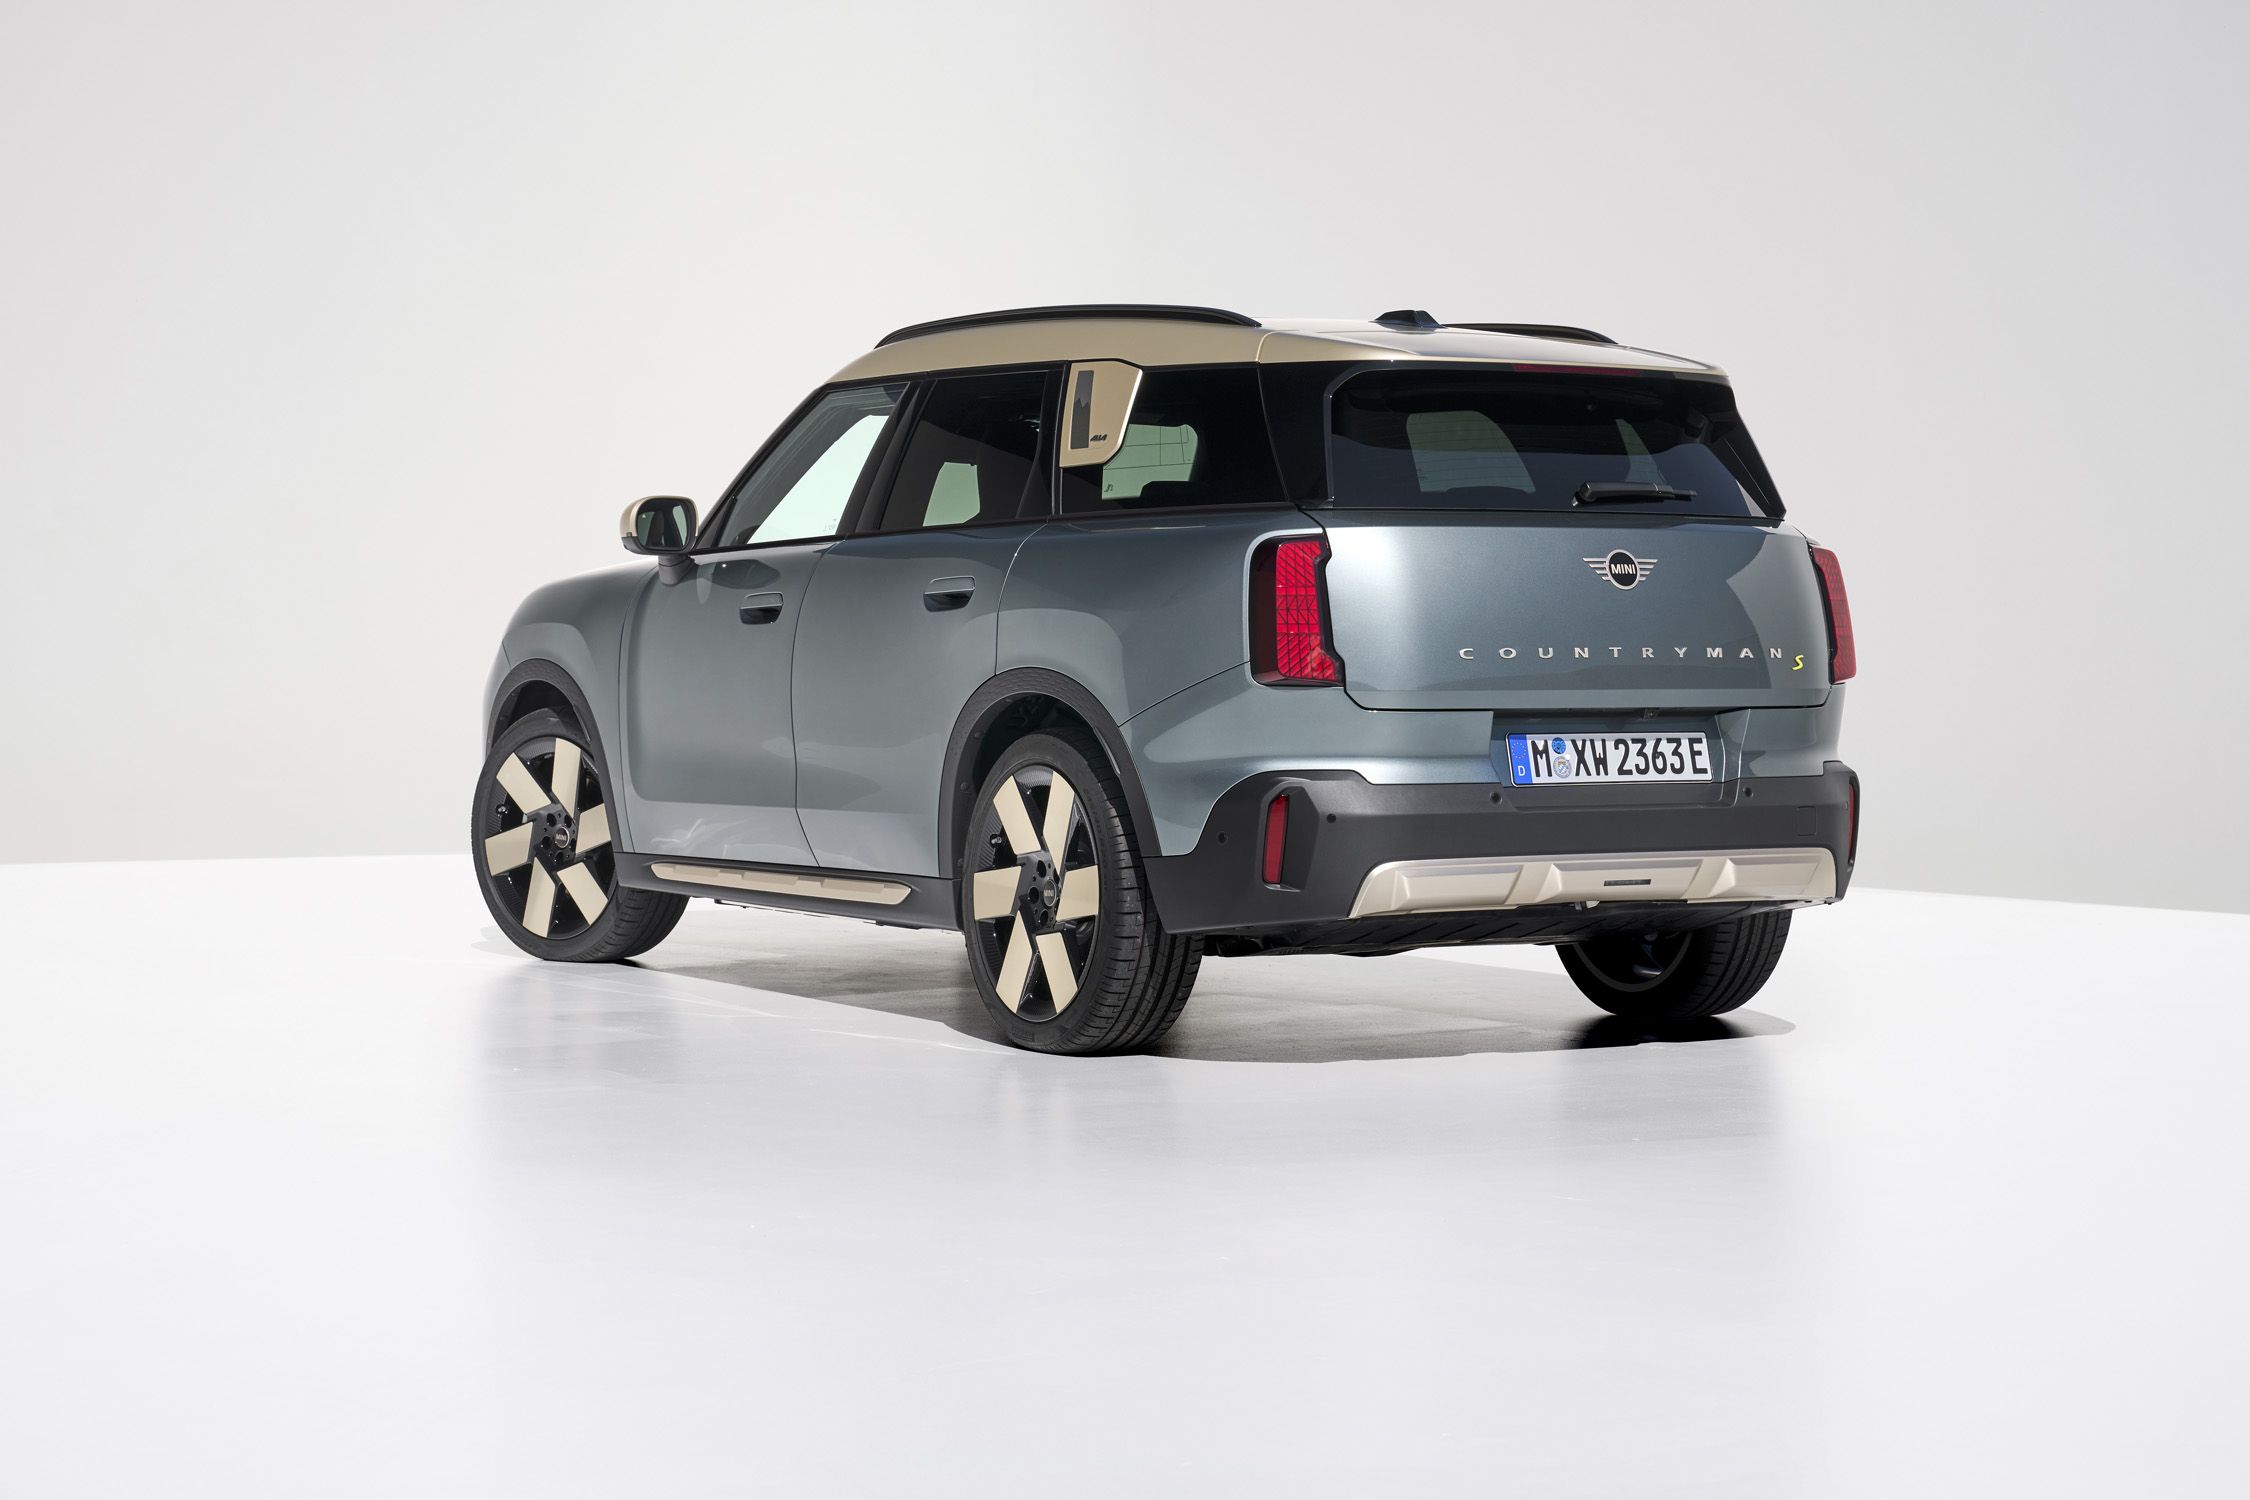 Mini Countryman SUV Is Revitalized as an EV with Sharper Styling